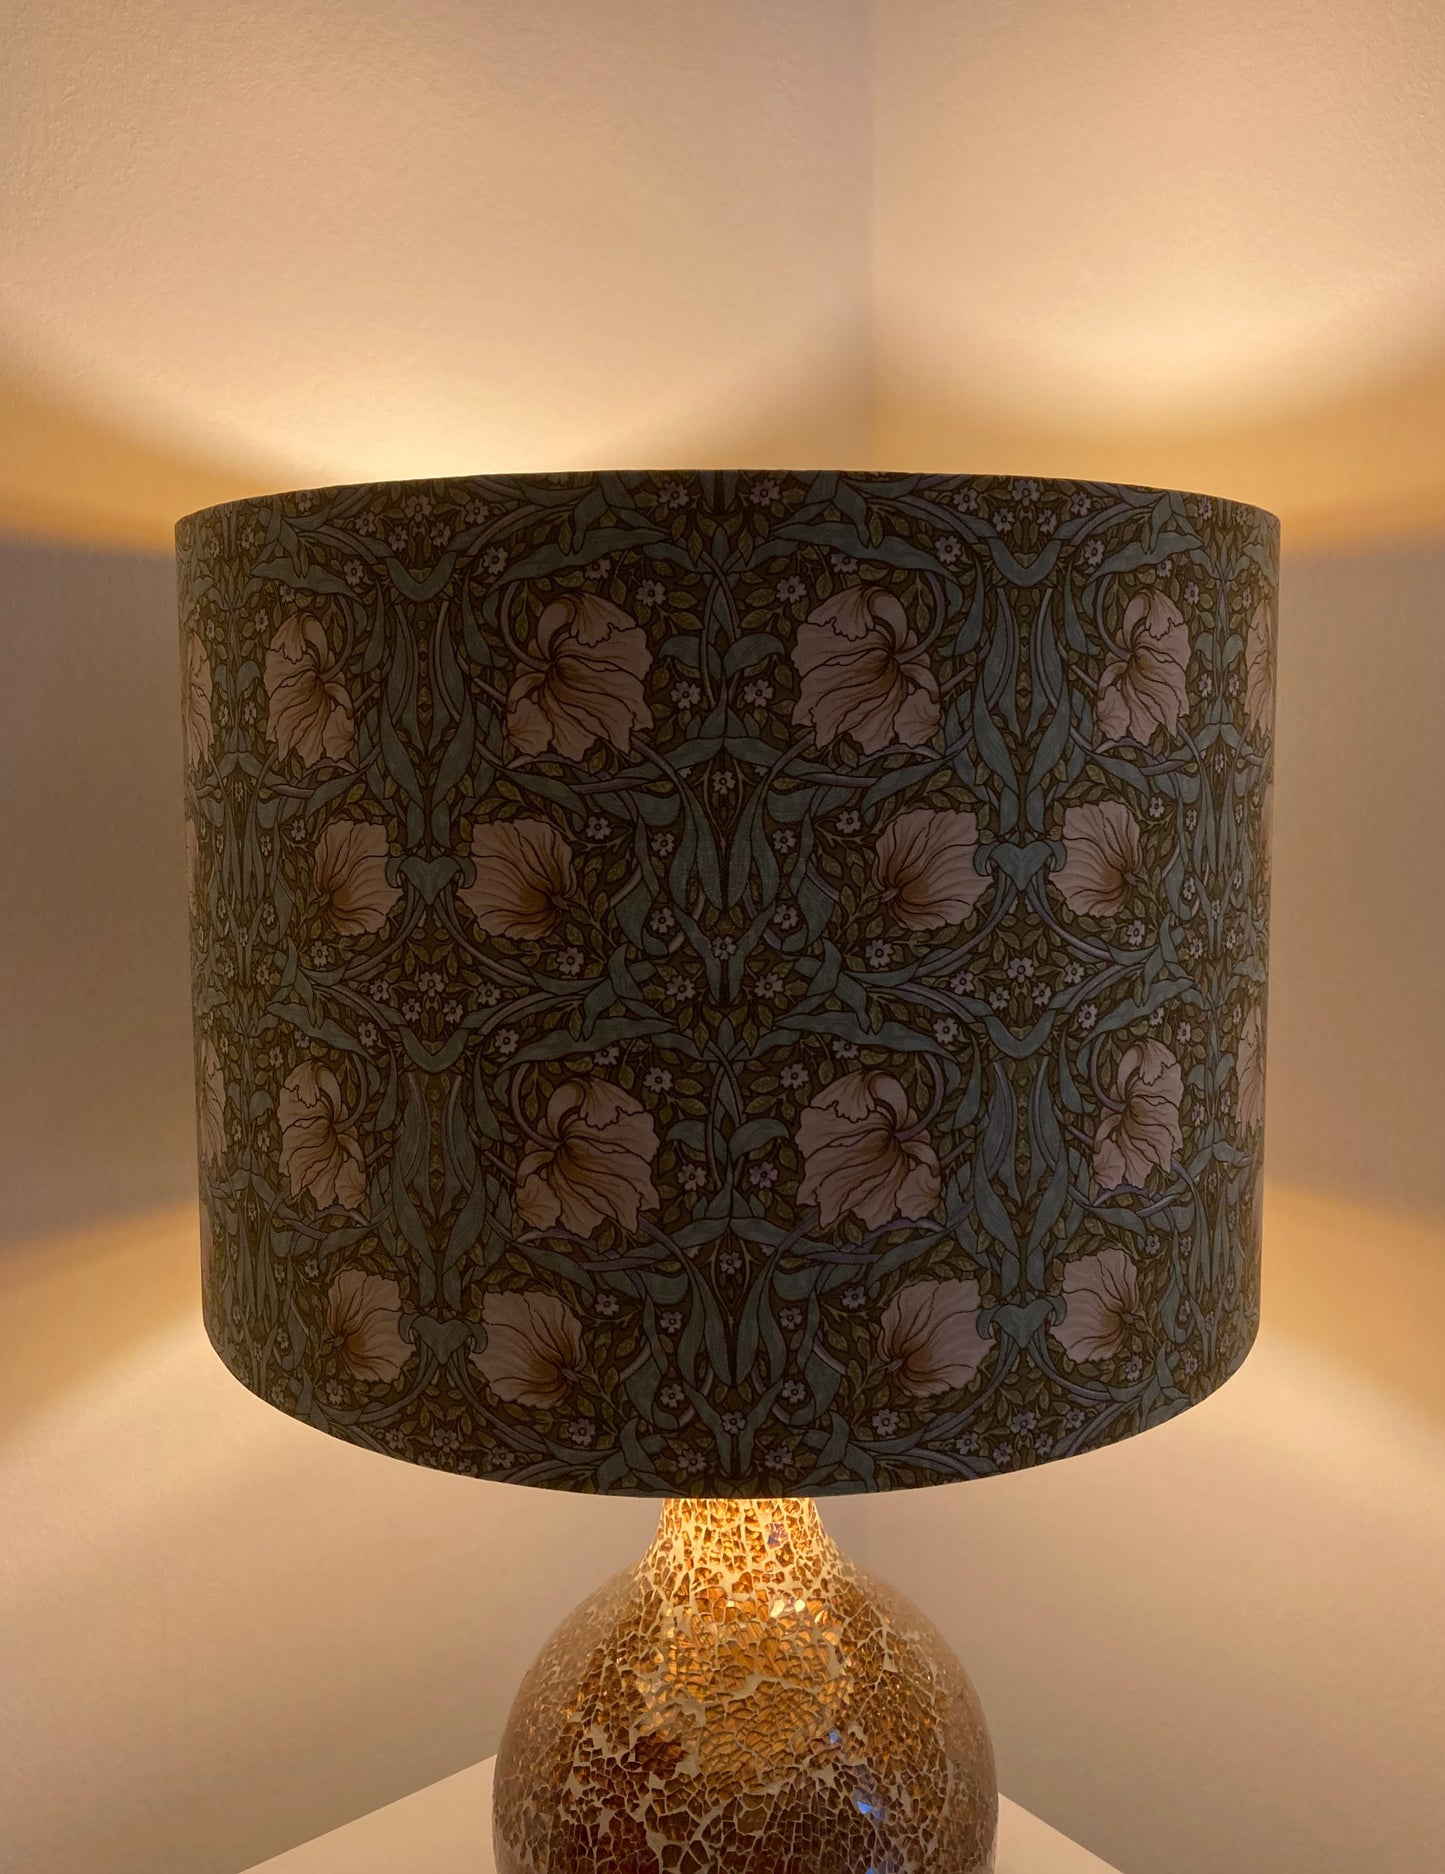 William Morris Green Pimpernel Fabric Lampshade for Table or Ceiling Lamps